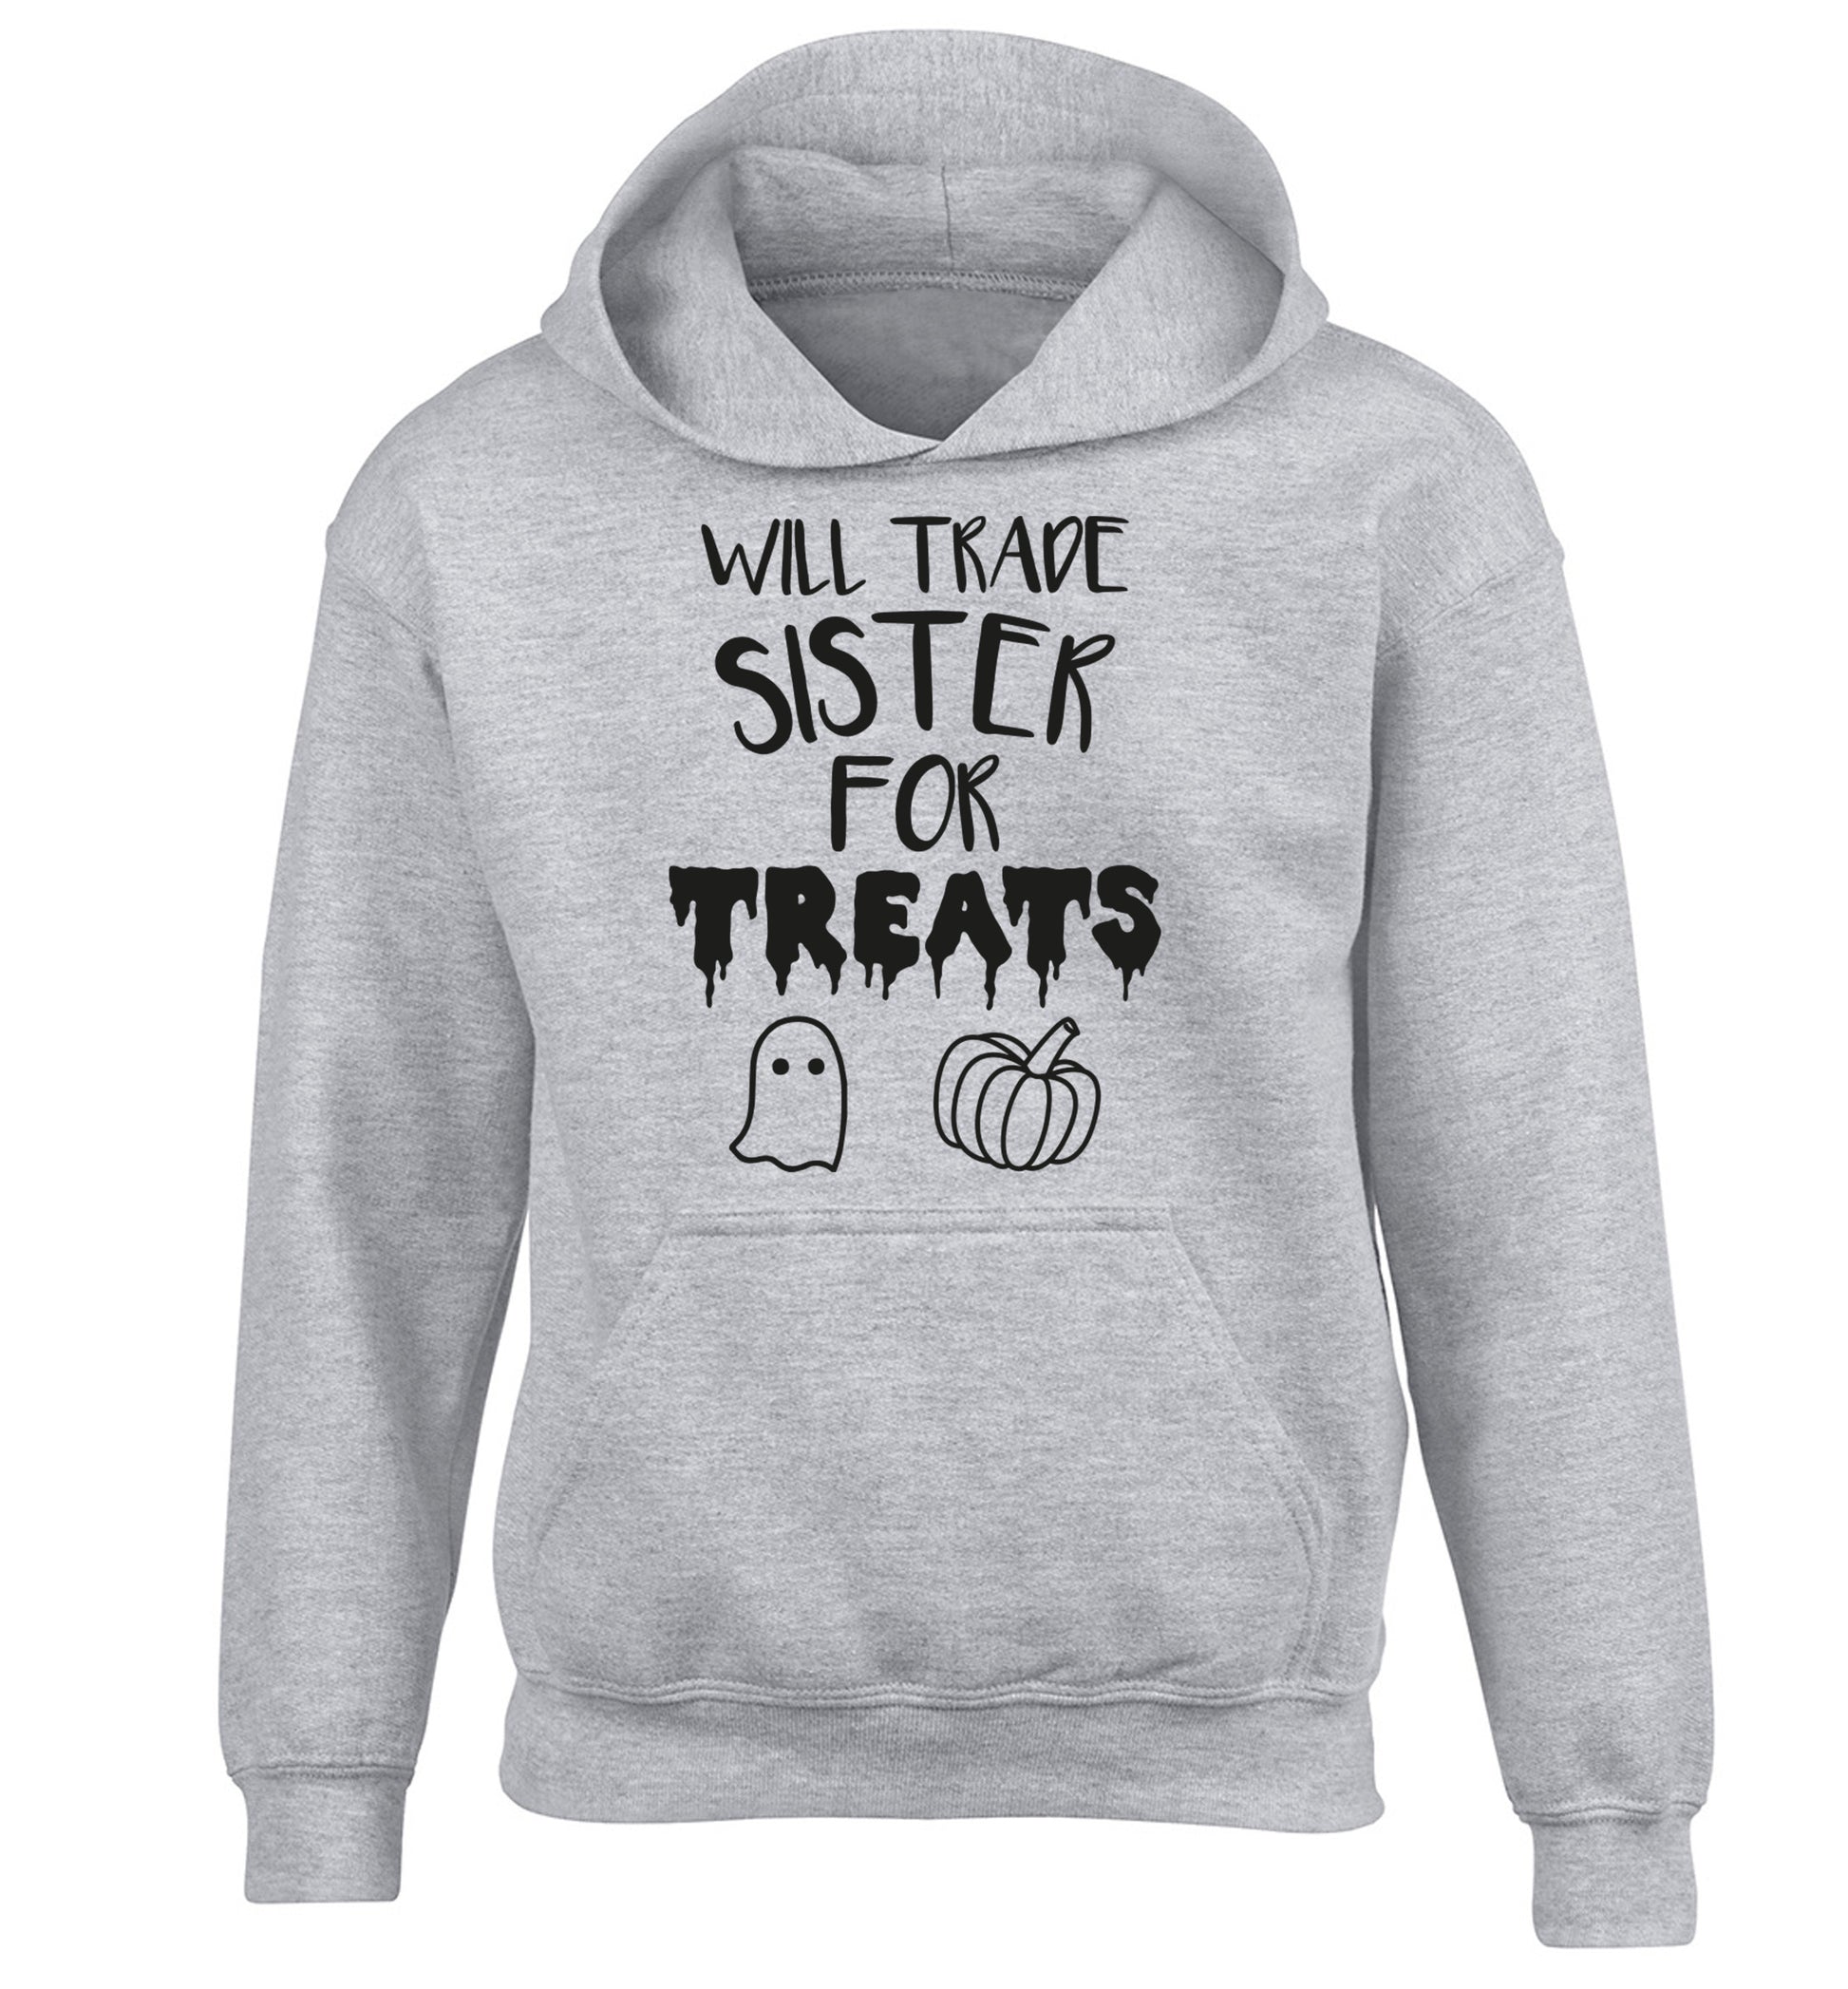 Will trade sister for treats children's grey hoodie 12-14 Years